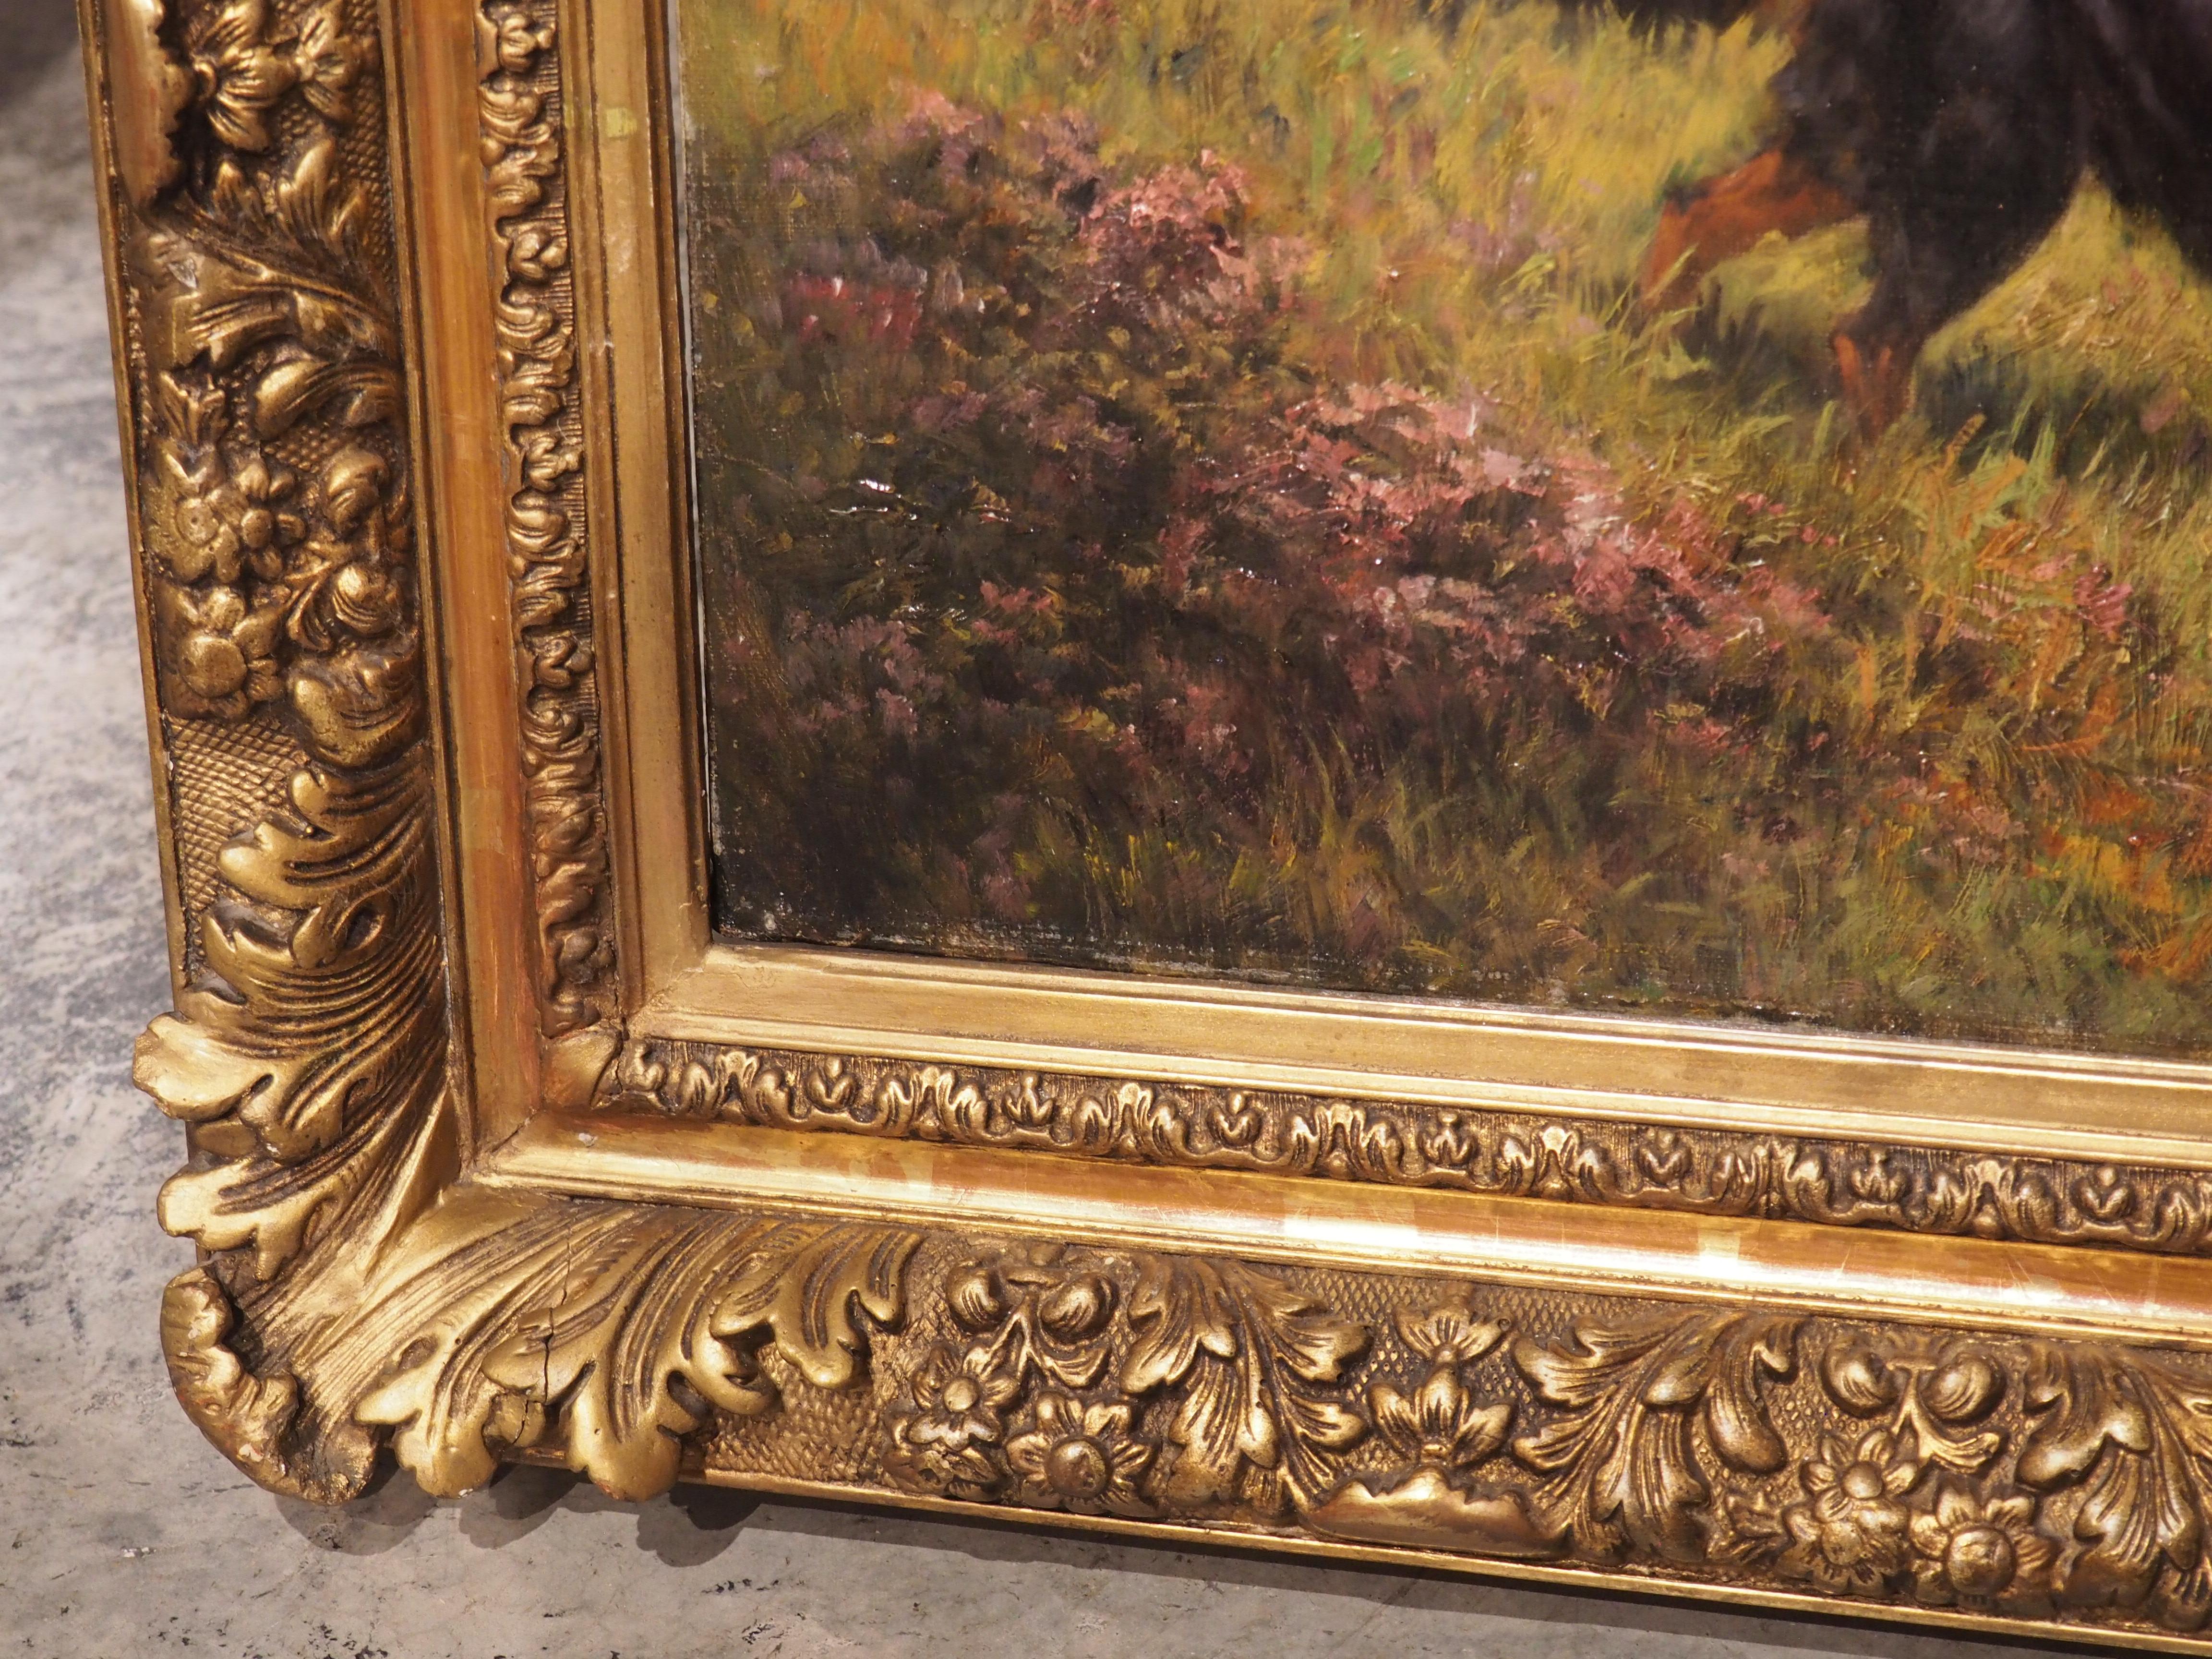 Surrounded by a floral and foliate giltwood frame, this antique French hunting dog painting exhibits a high level of artist skill, and it is a must-own for any dog lover. The canvas is signed in the lower right corner by the artist, “E Petit”.